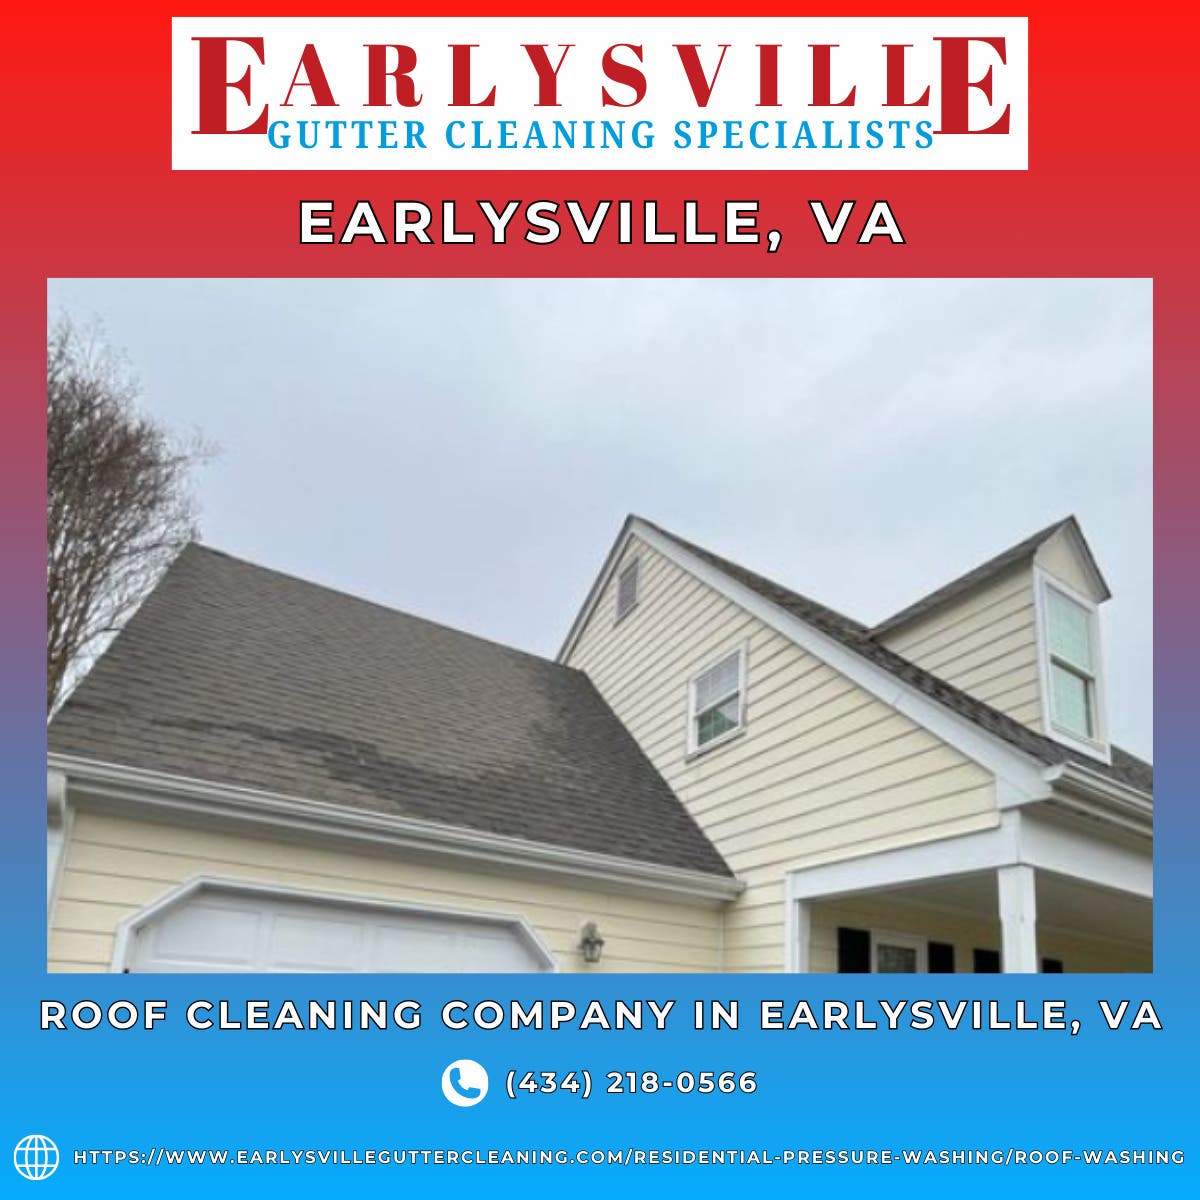 Roof Cleaning Company in Earlysville, VA - Earlysville Gutter Cleaning Specialists